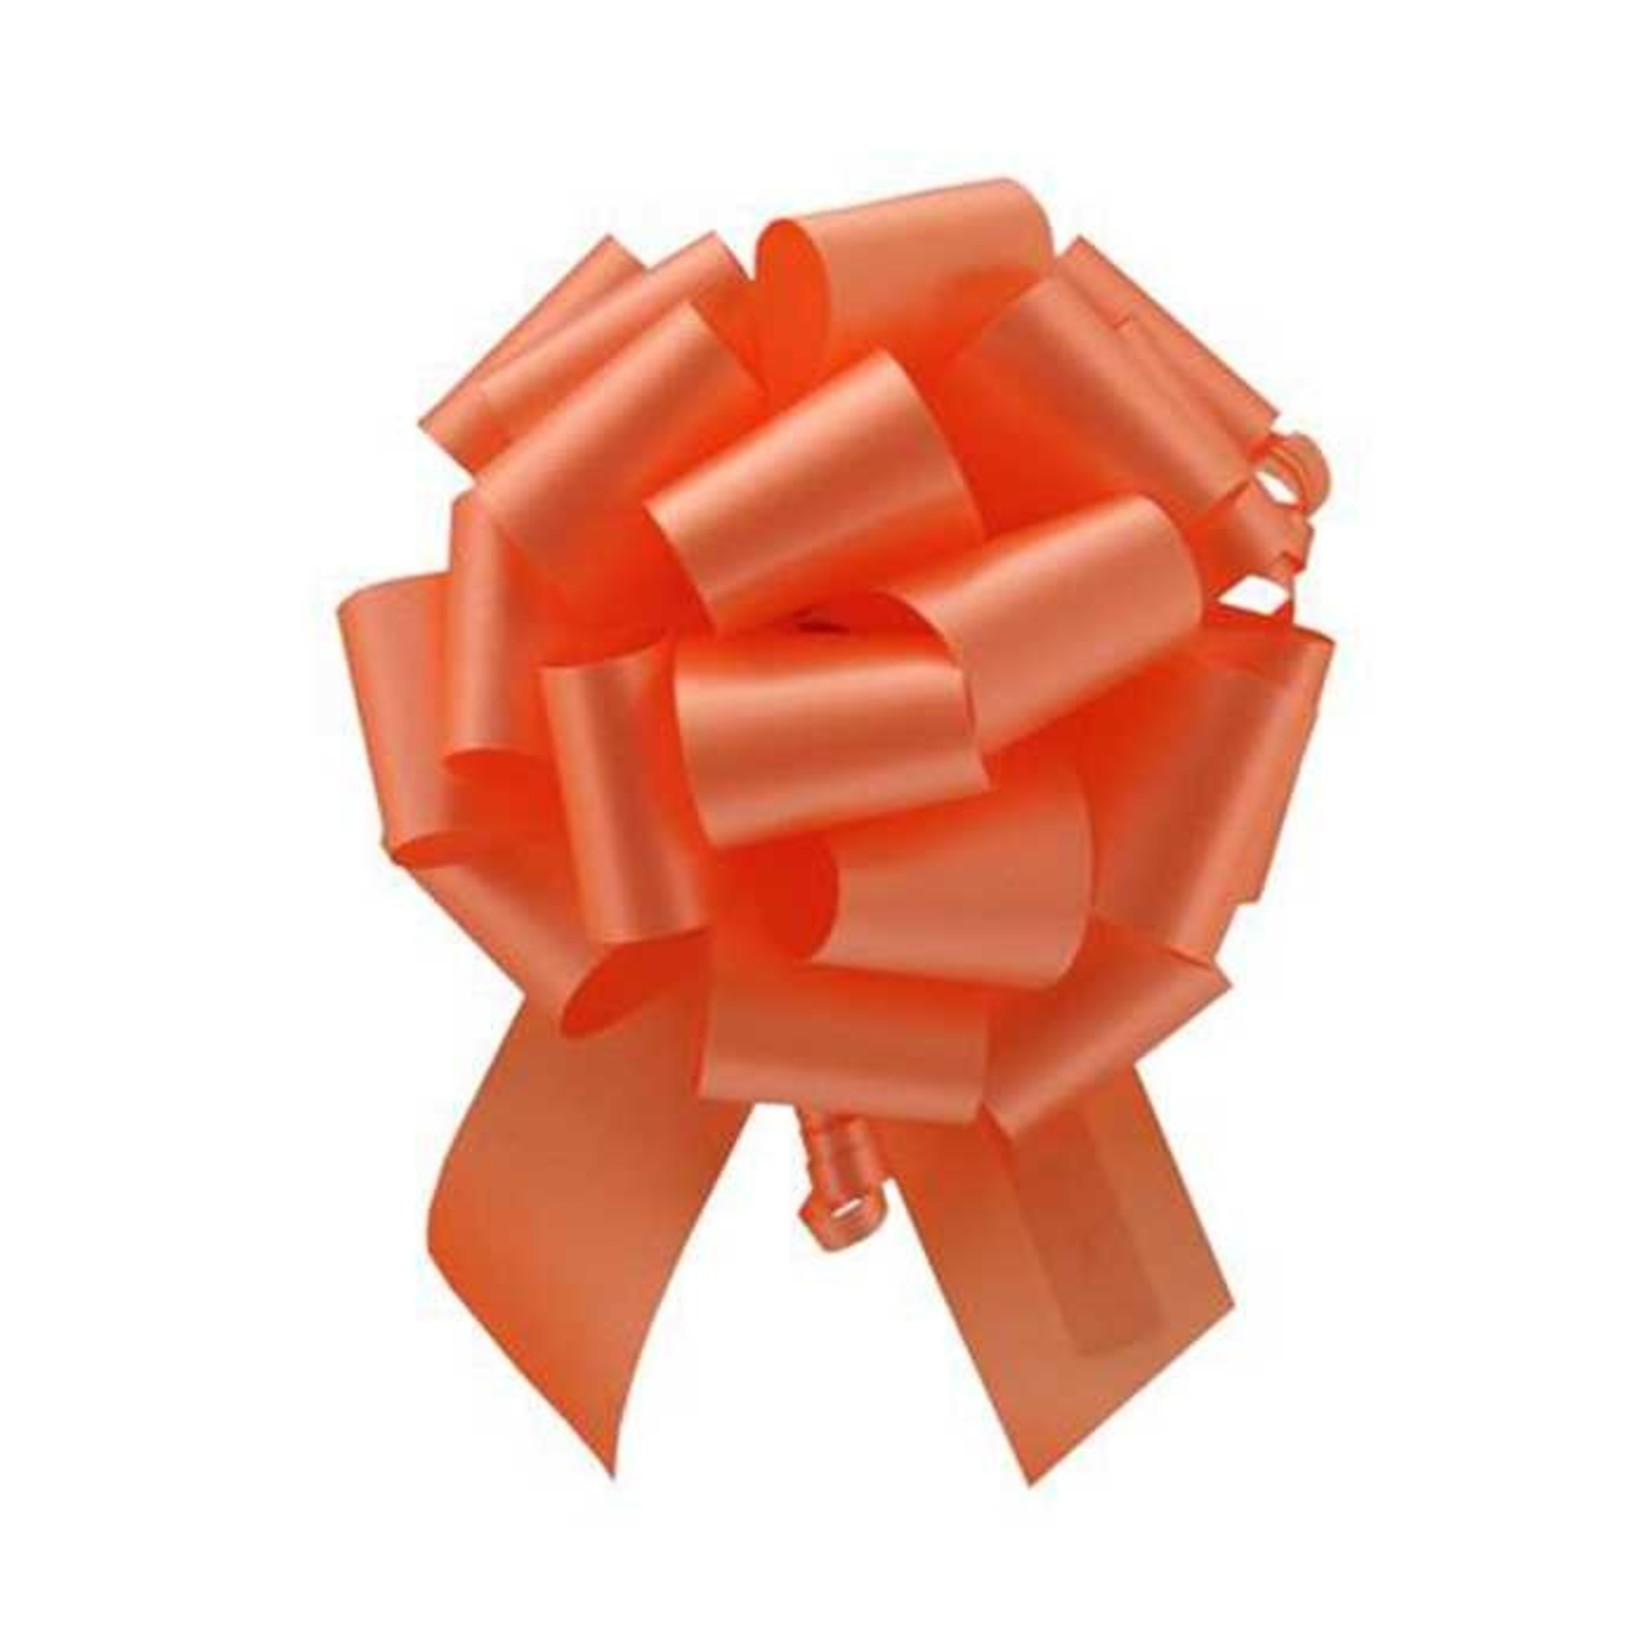 PERFECT BOW ORANGE #40, 2.5" ribbon width, 8"d bow size, 20 total loops